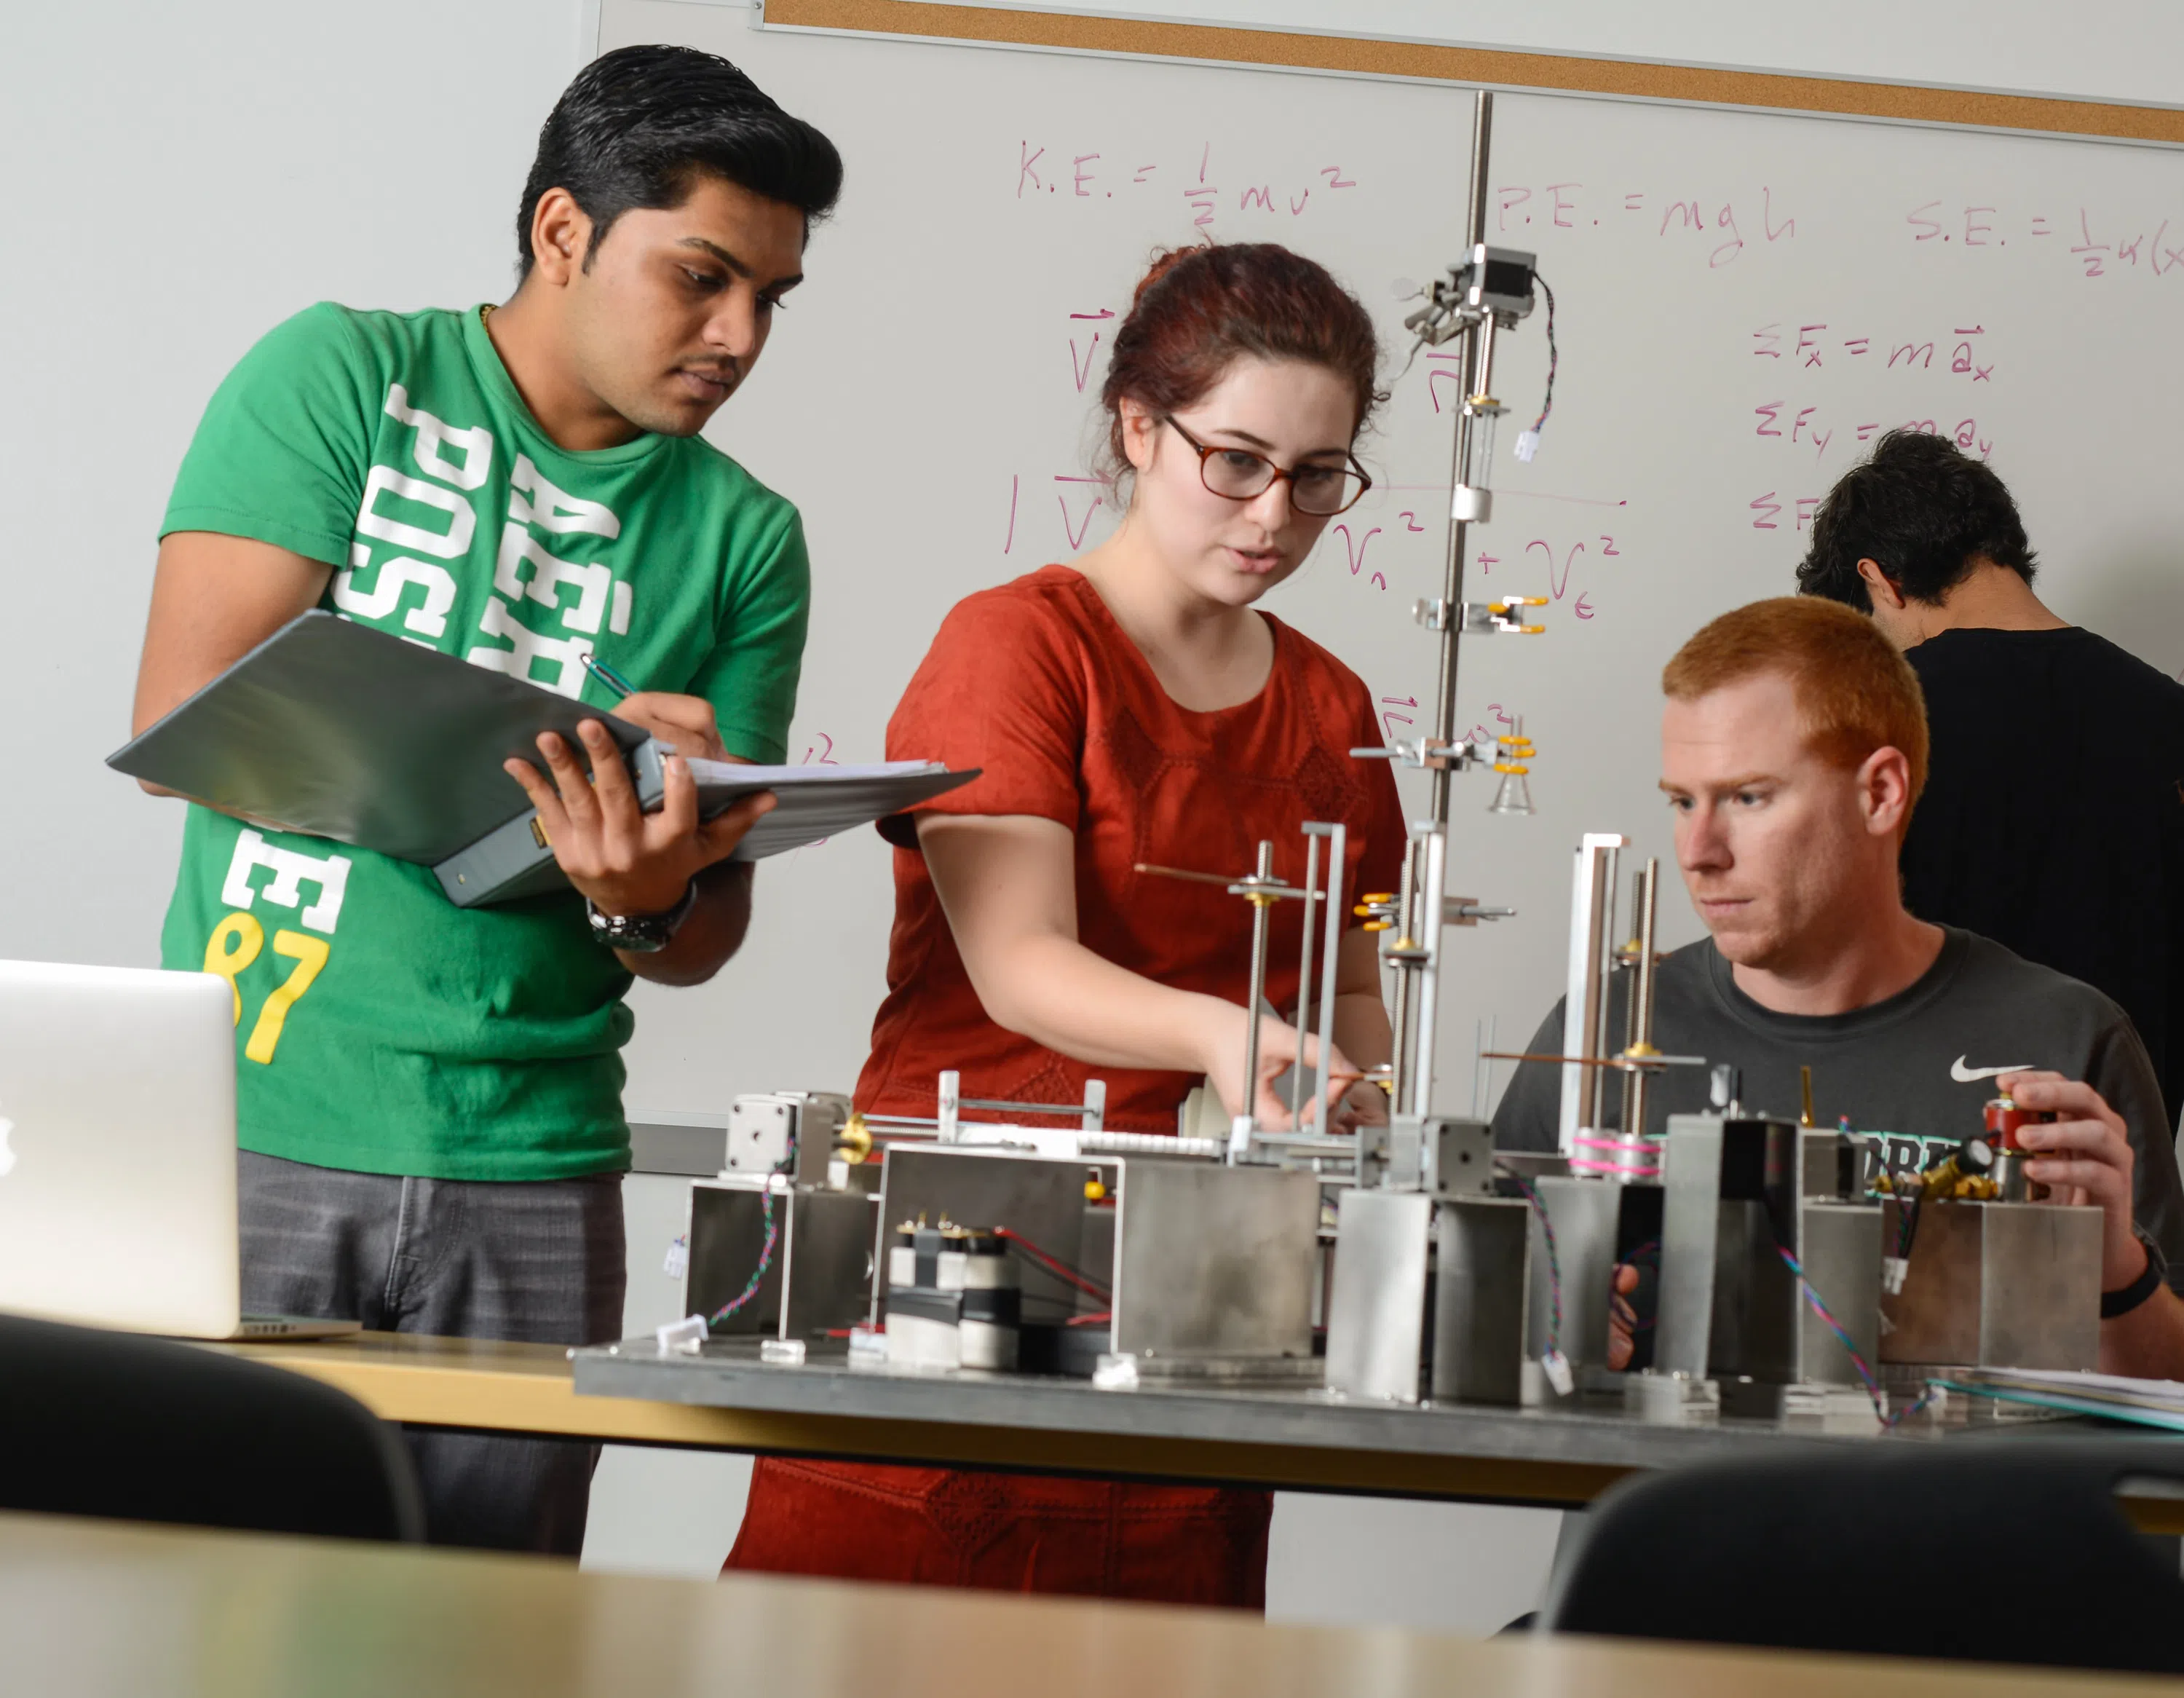 Students working on a mechanical engineering project in a lab.